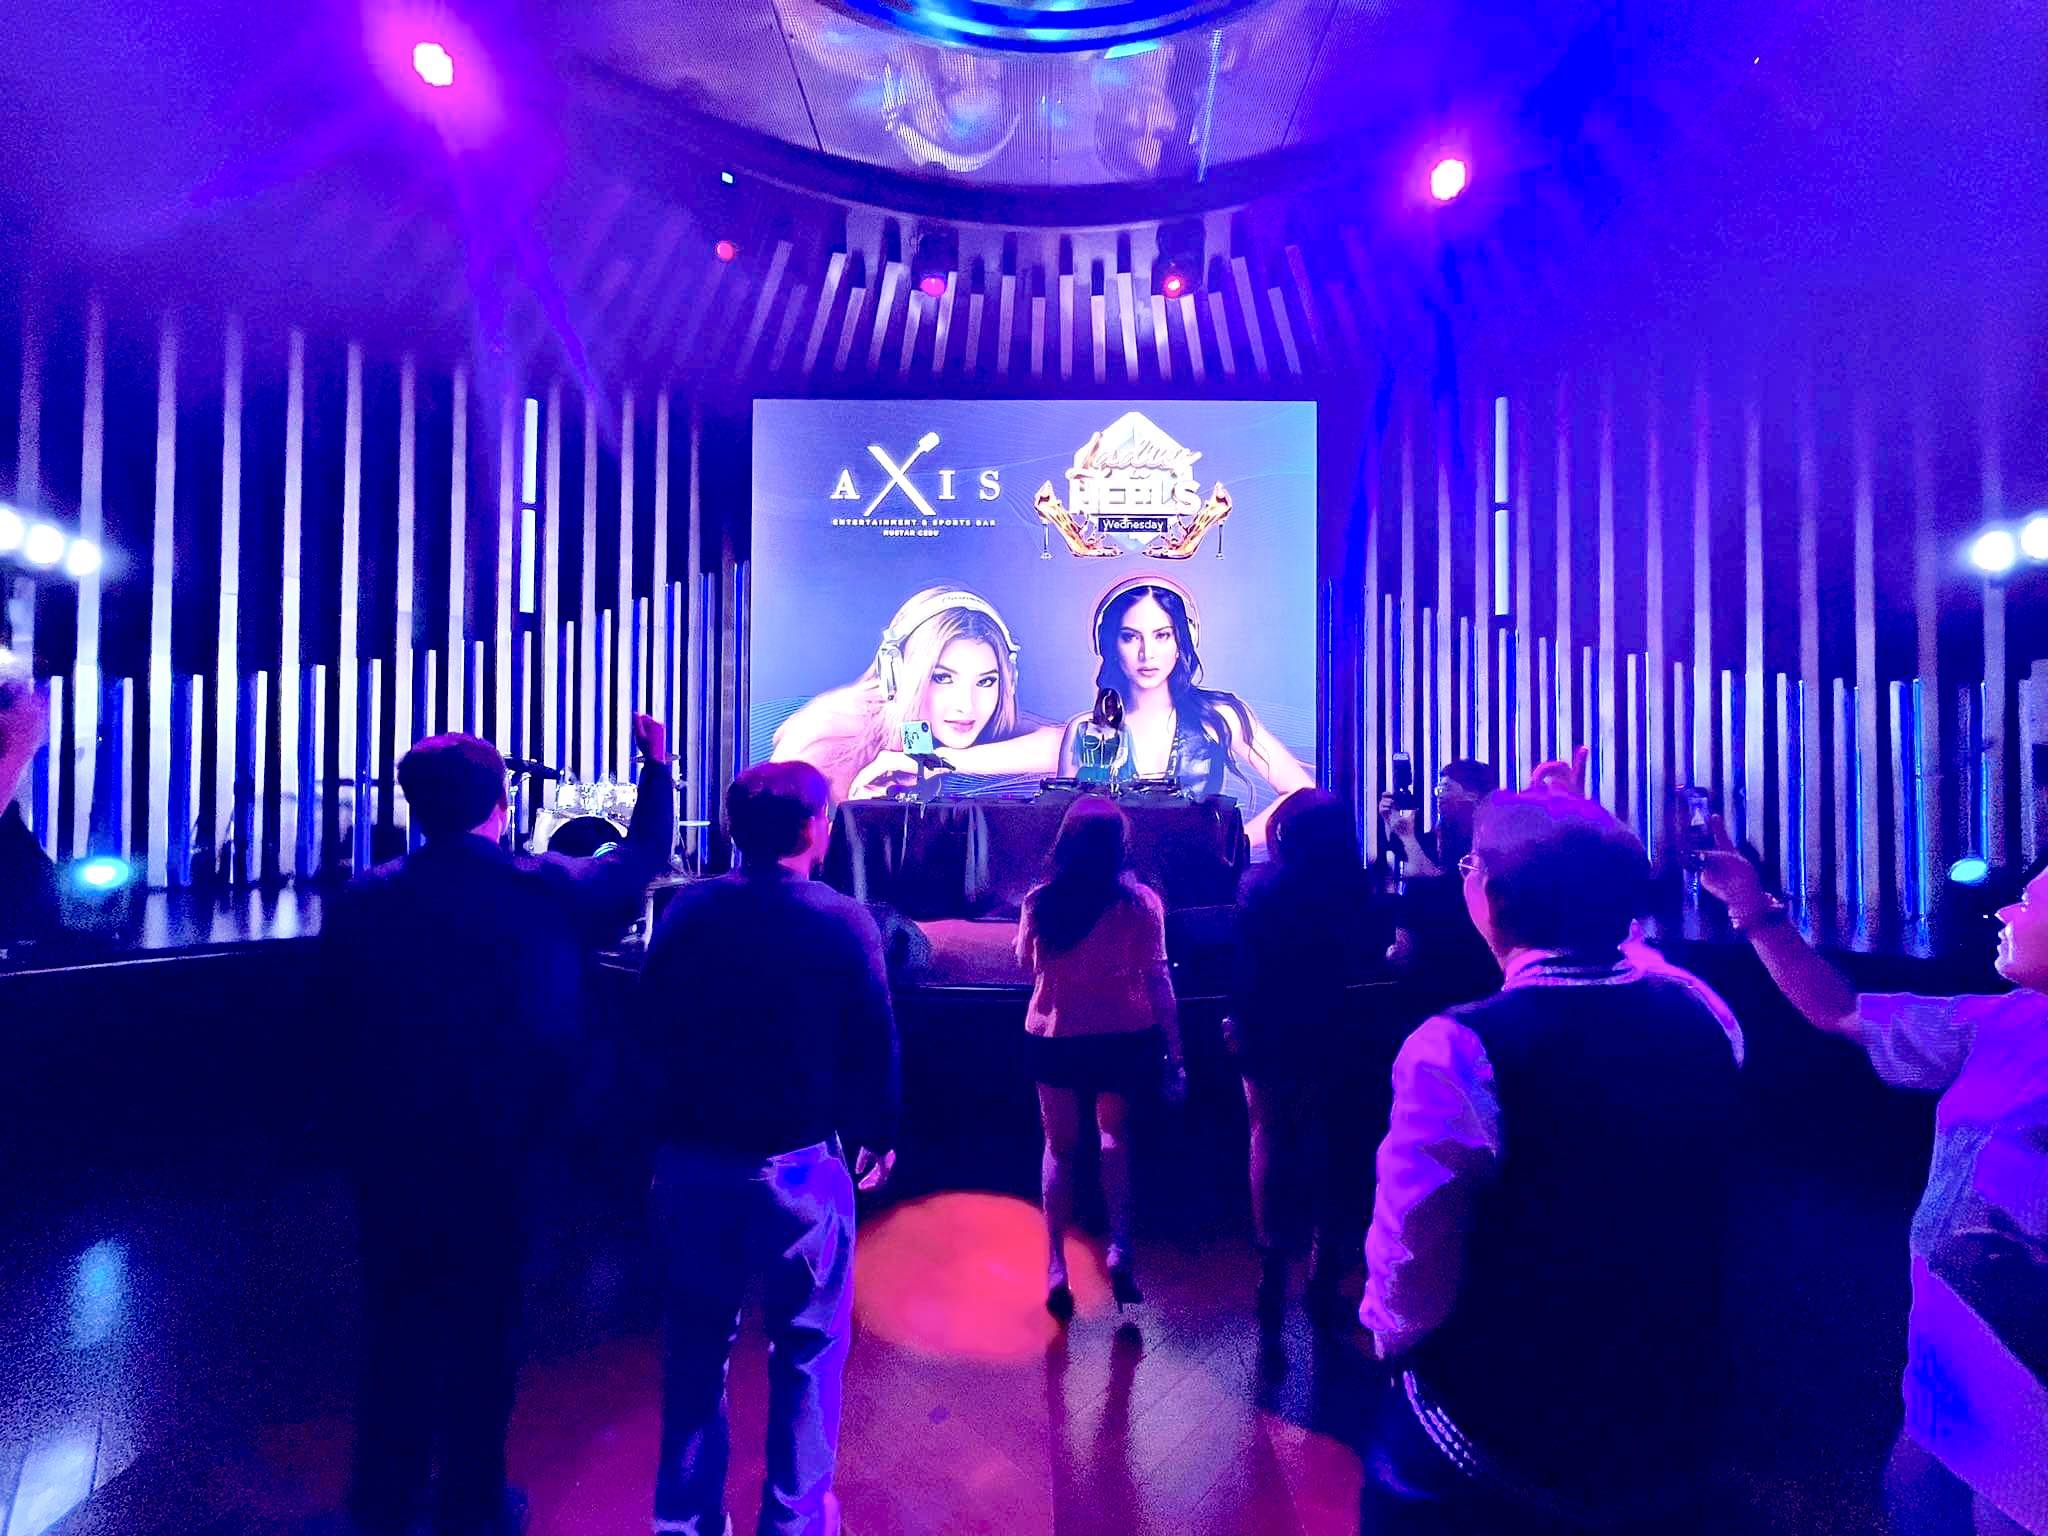 Axis Bar: Where a Unique Experience Unfolds Every Night